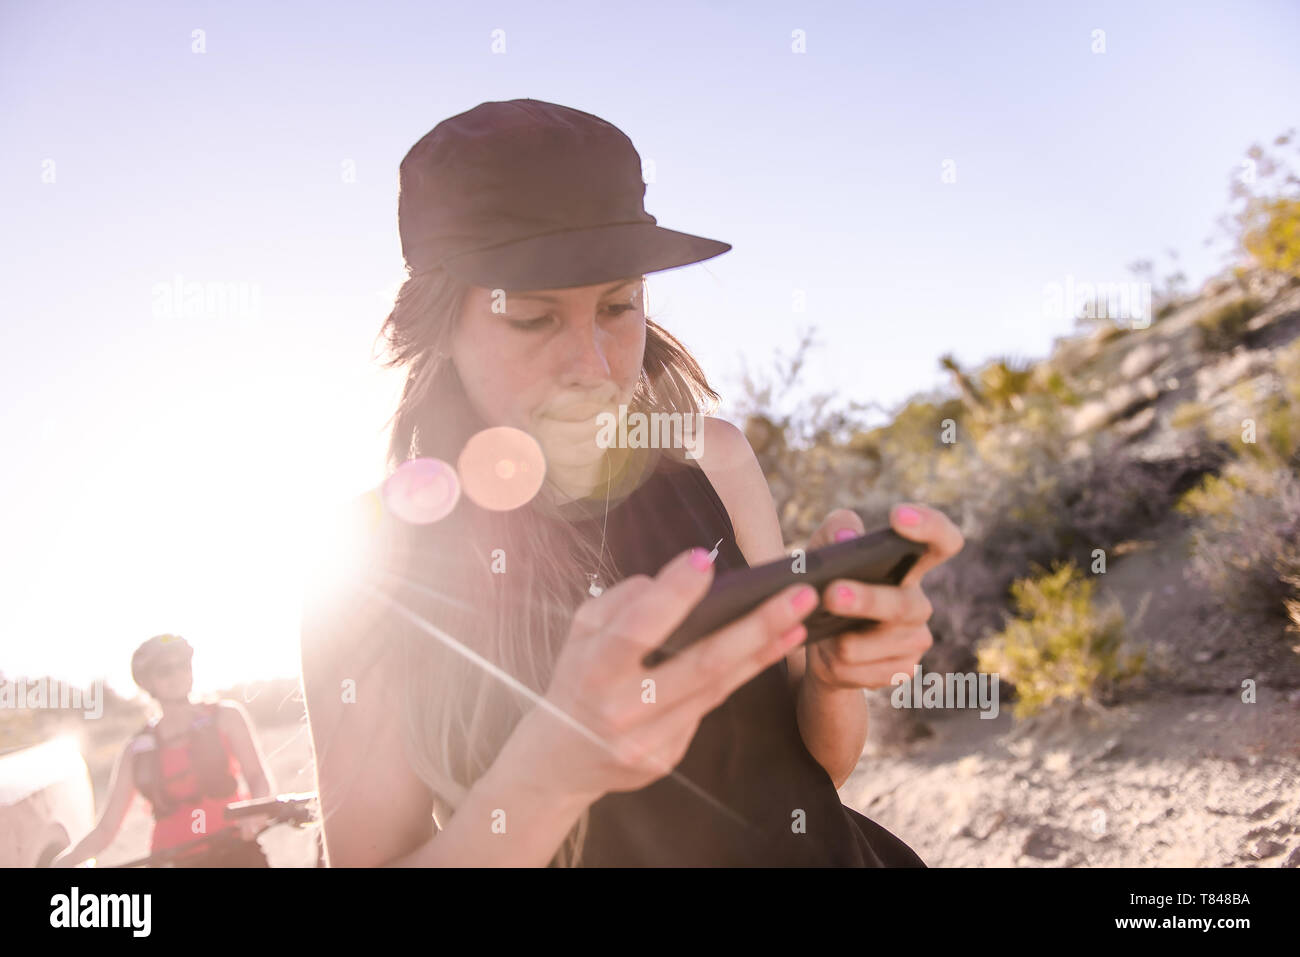 Woman operating drone (unmanned aerial vehicle) using smartphone on rural dirt track Stock Photo